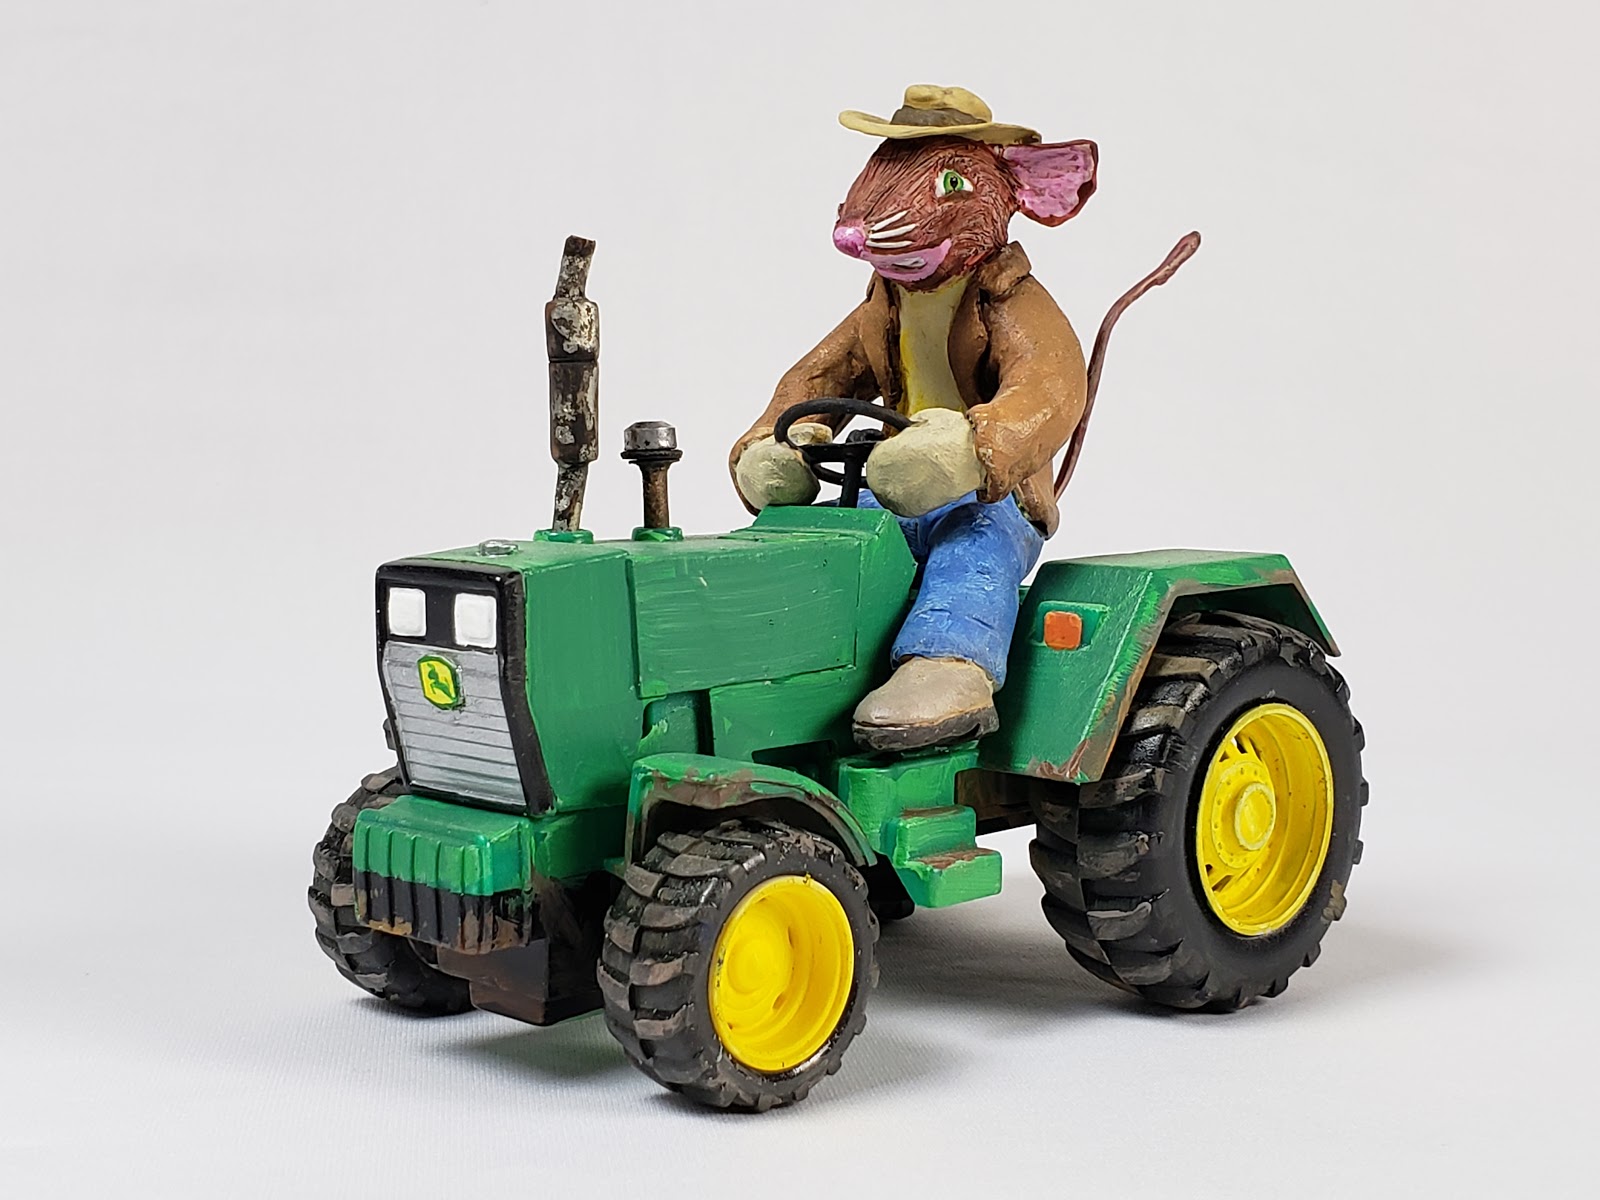 country mouse